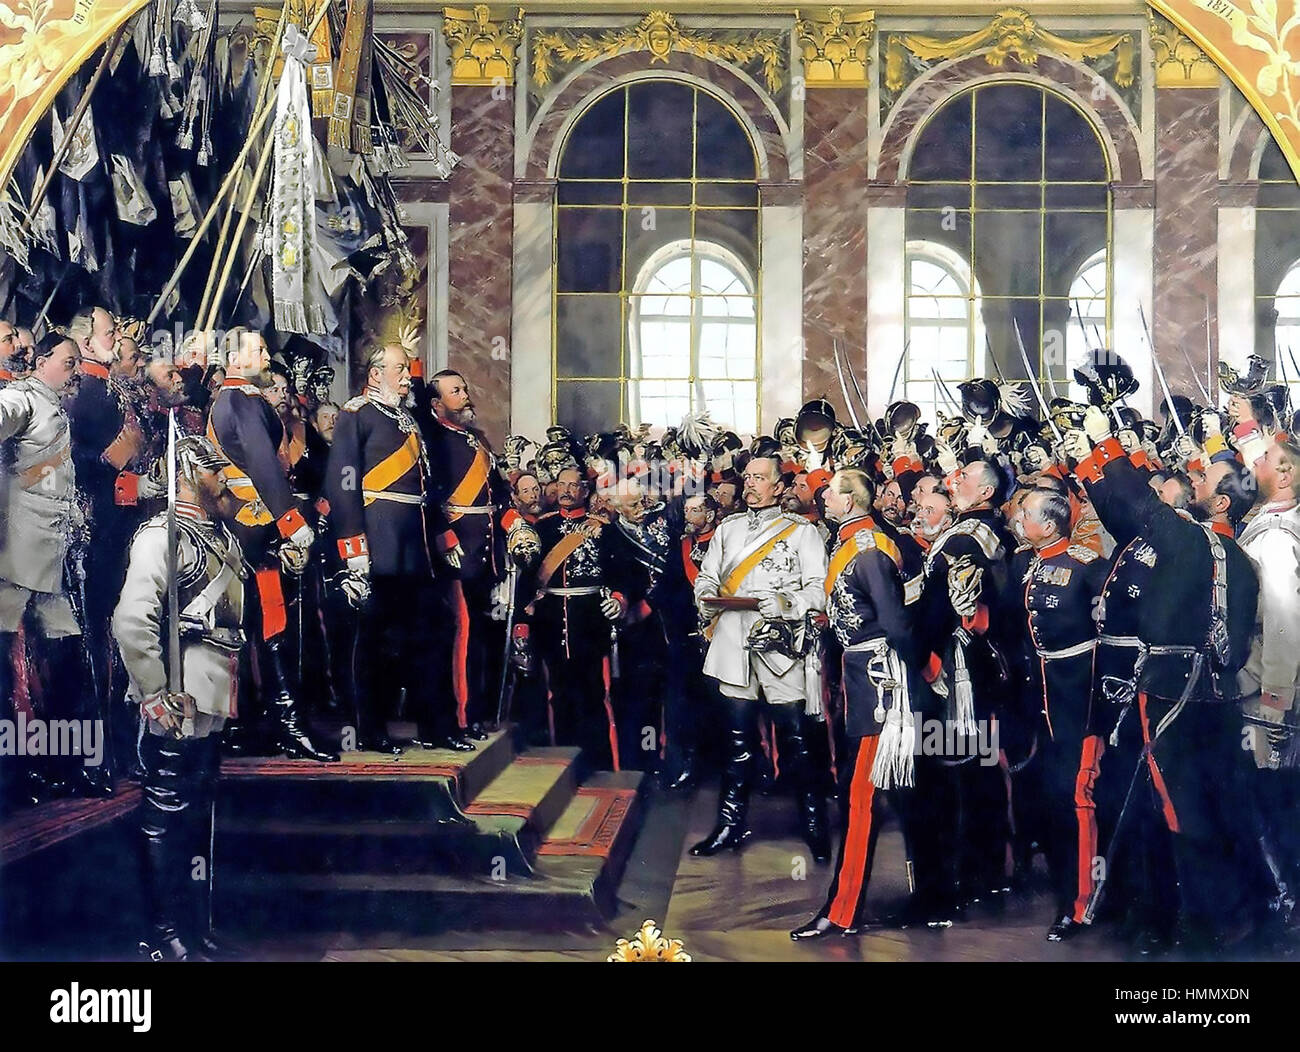 OTTO von BISMARCK (1815-1898) Prussian statesman in white uniform at the proclamation of Wilhelm I as German Emperor in the Versailles Hall of Mirrors  18 January 1871. Painting by Anton von Werner Stock Photo